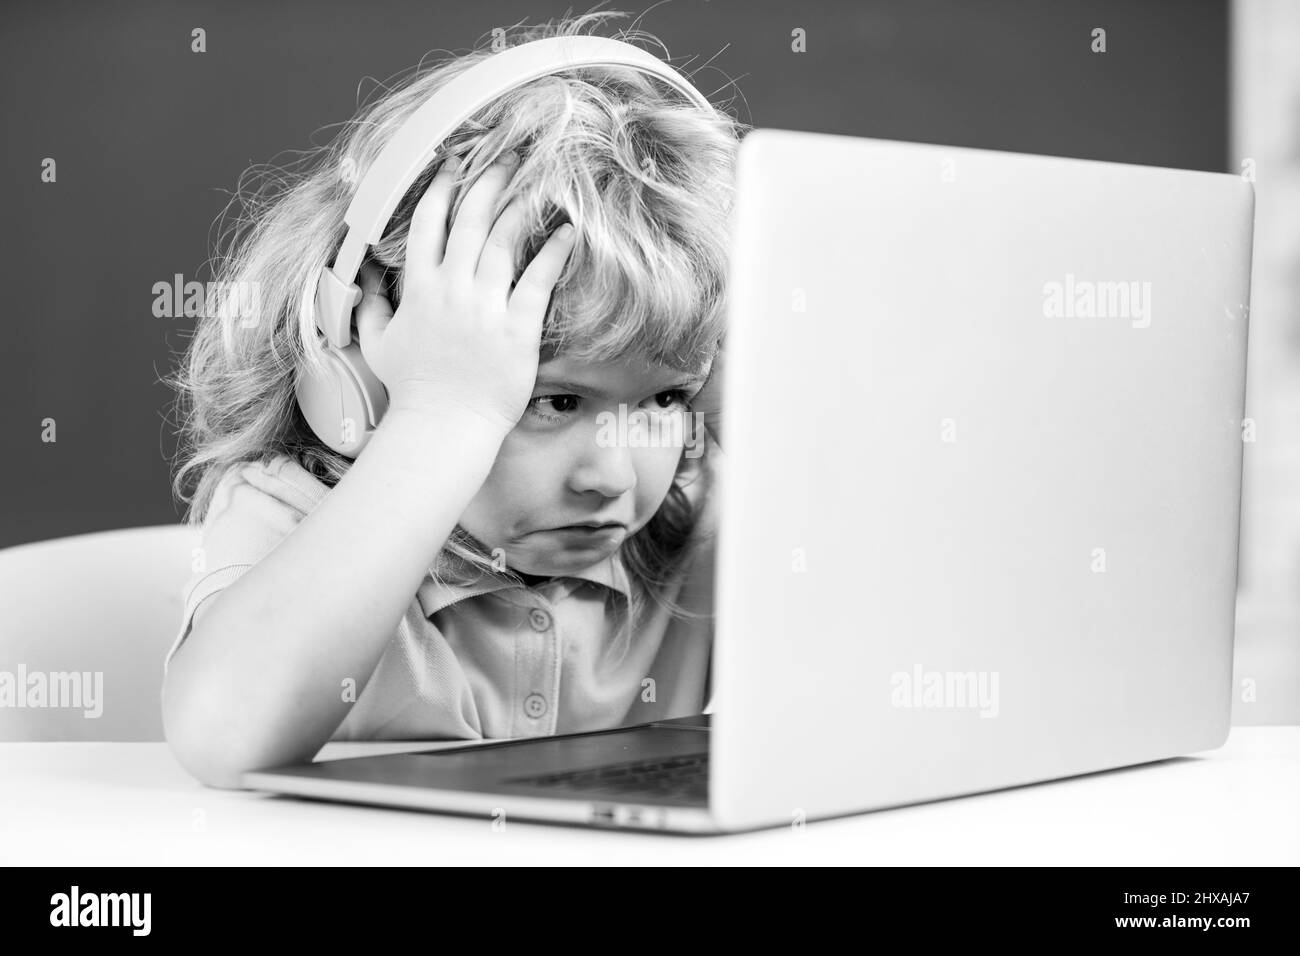 Angry sad school kid working in computer class. Little funny system administrator or programmer. Stock Photo